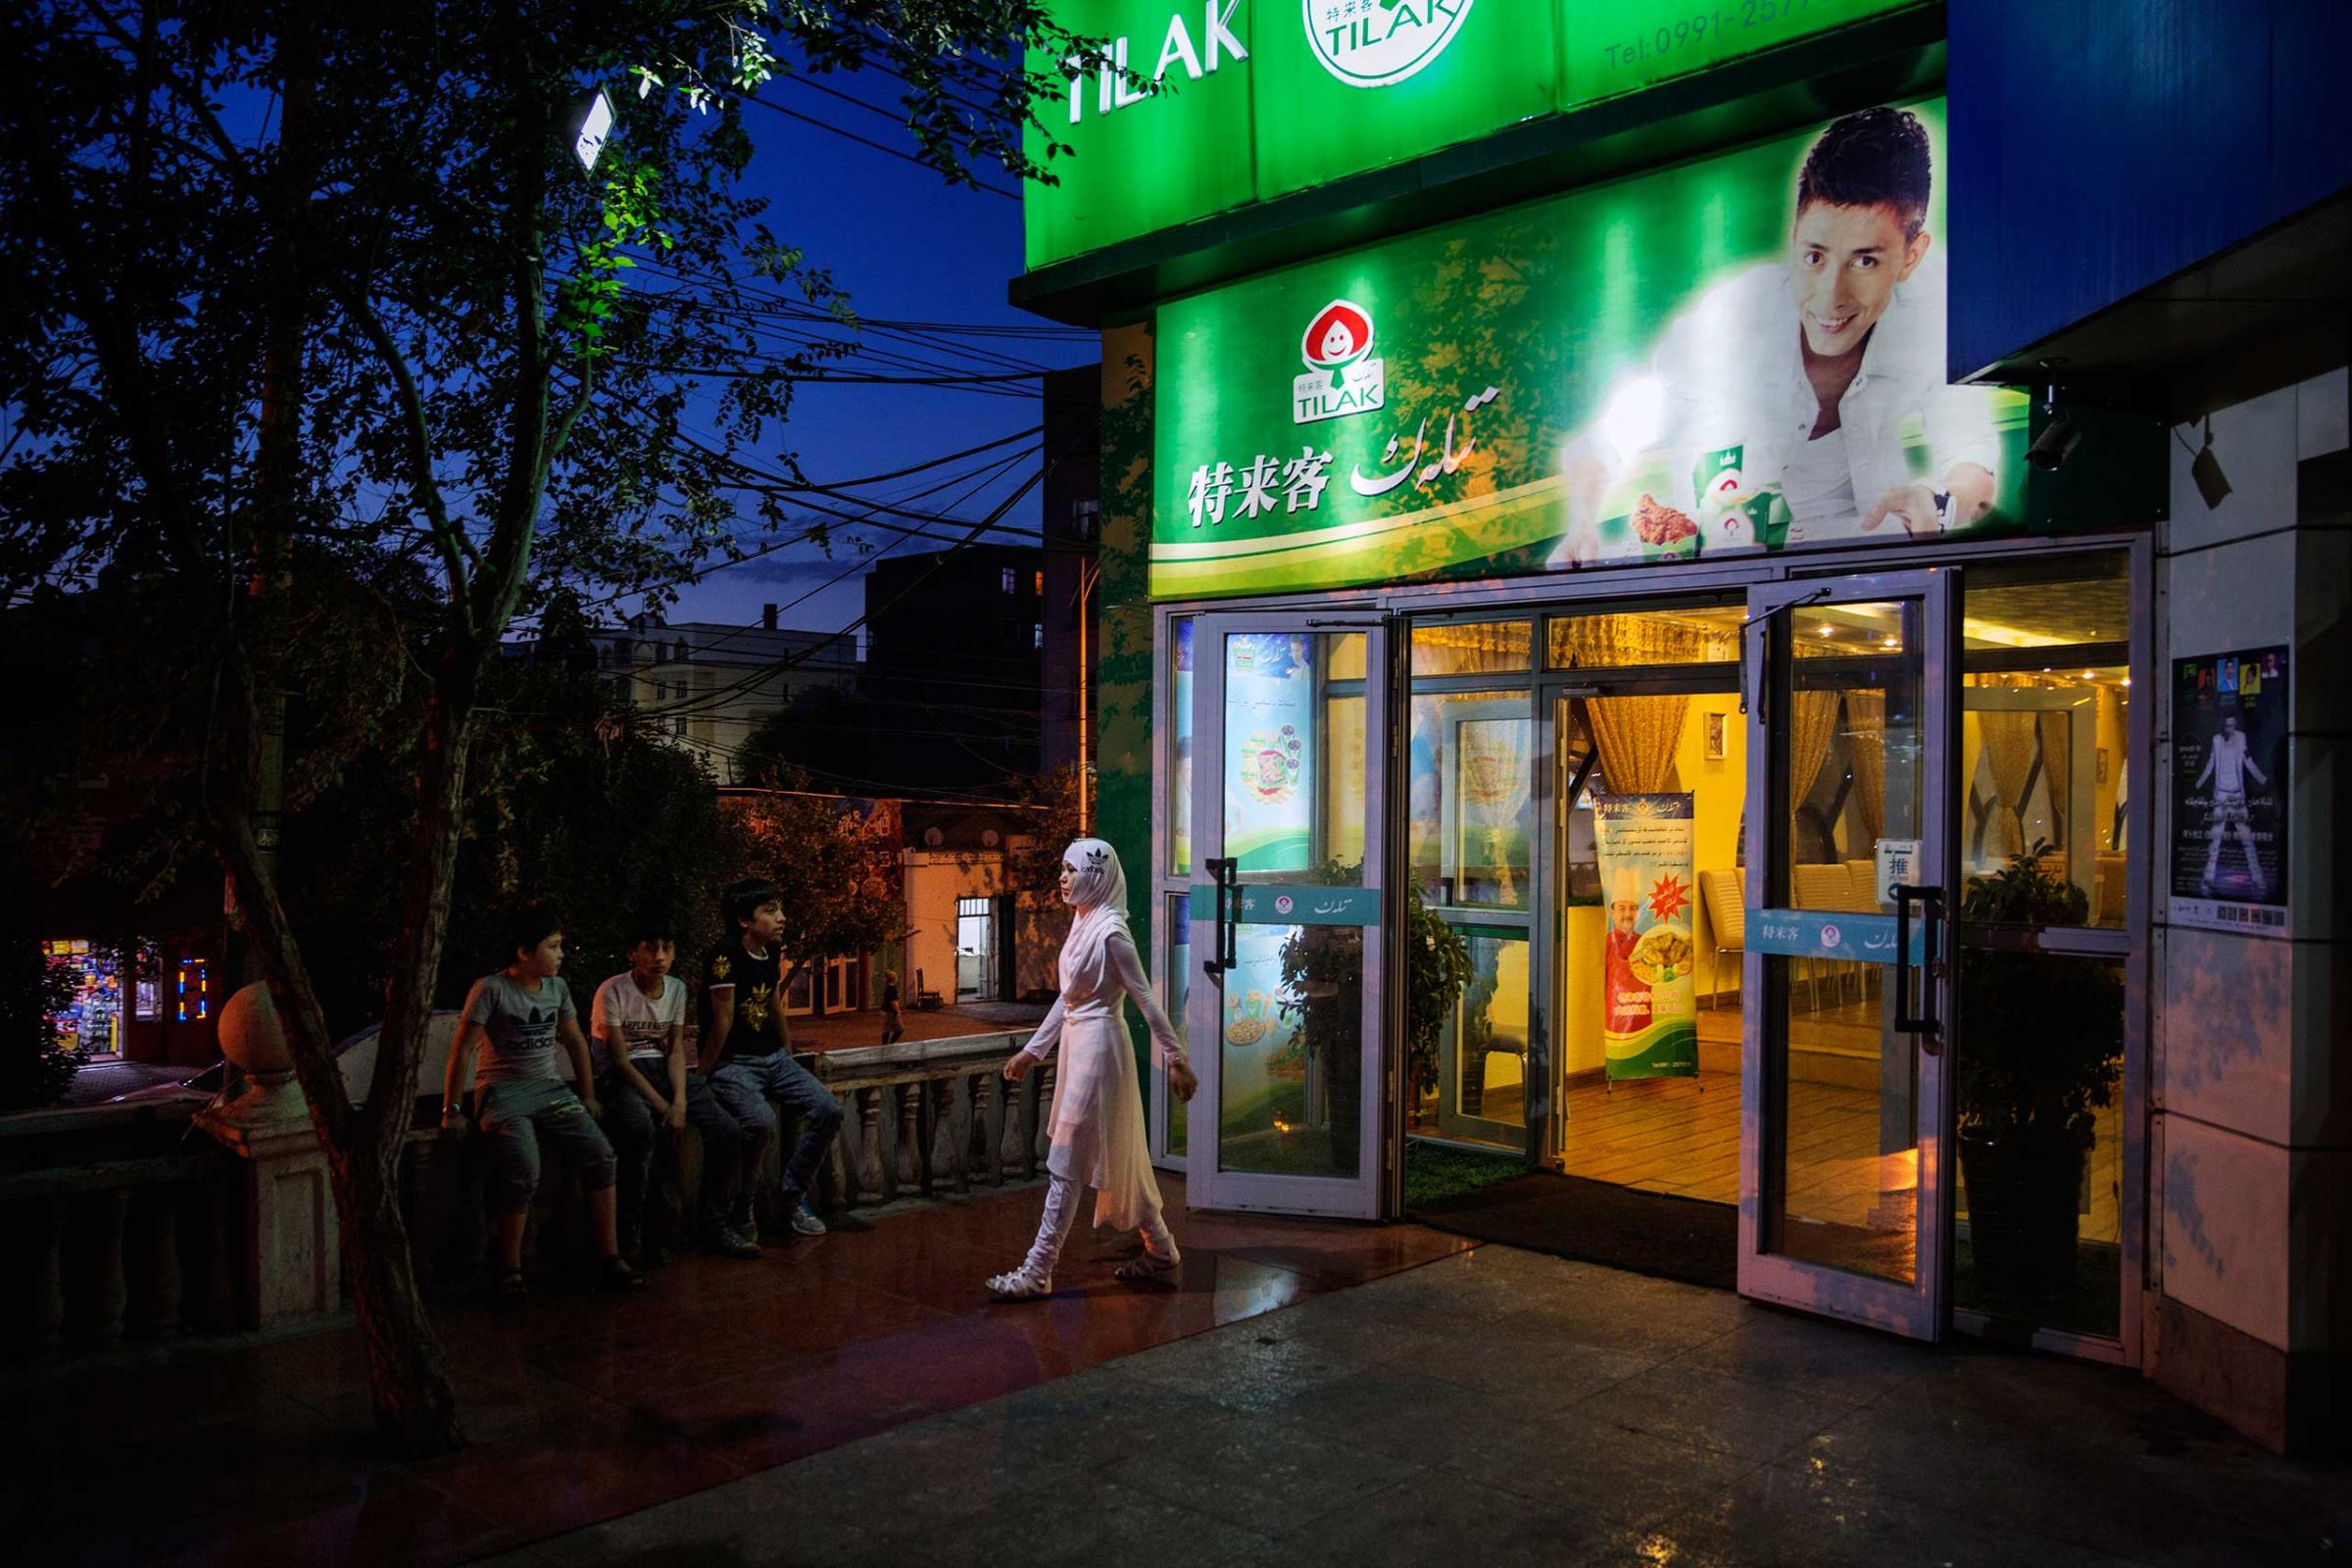 People stand outside a restaurant endorsed by Uighur pop sensation Ablajan, who's picture is on the sign, in Urumqi, China on July 31st, 2014. The performance, held at a state owned broadcasting facility, which Ablajan and his dancers had been preparing for for several weeks, was cancelled an hour before show time. The official reason was due to technical problems but members of the performance admitted it was more likely due to political sensitivities following the recent unrest between Uighurs and Han authorities in Xinjiang.